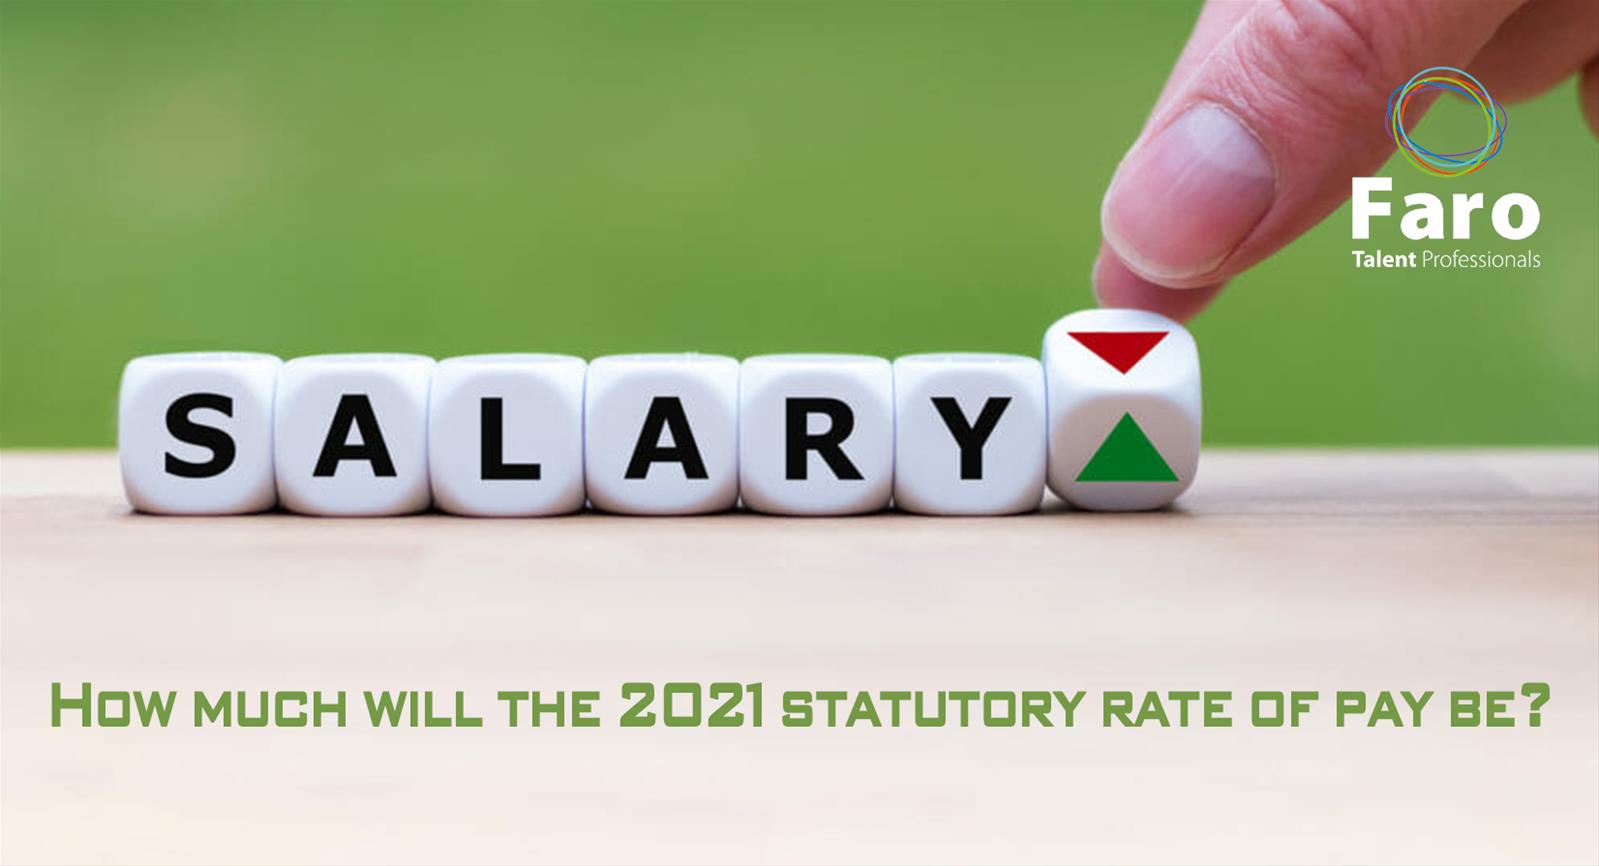 How much will the 2021 statutory rate of pay be?